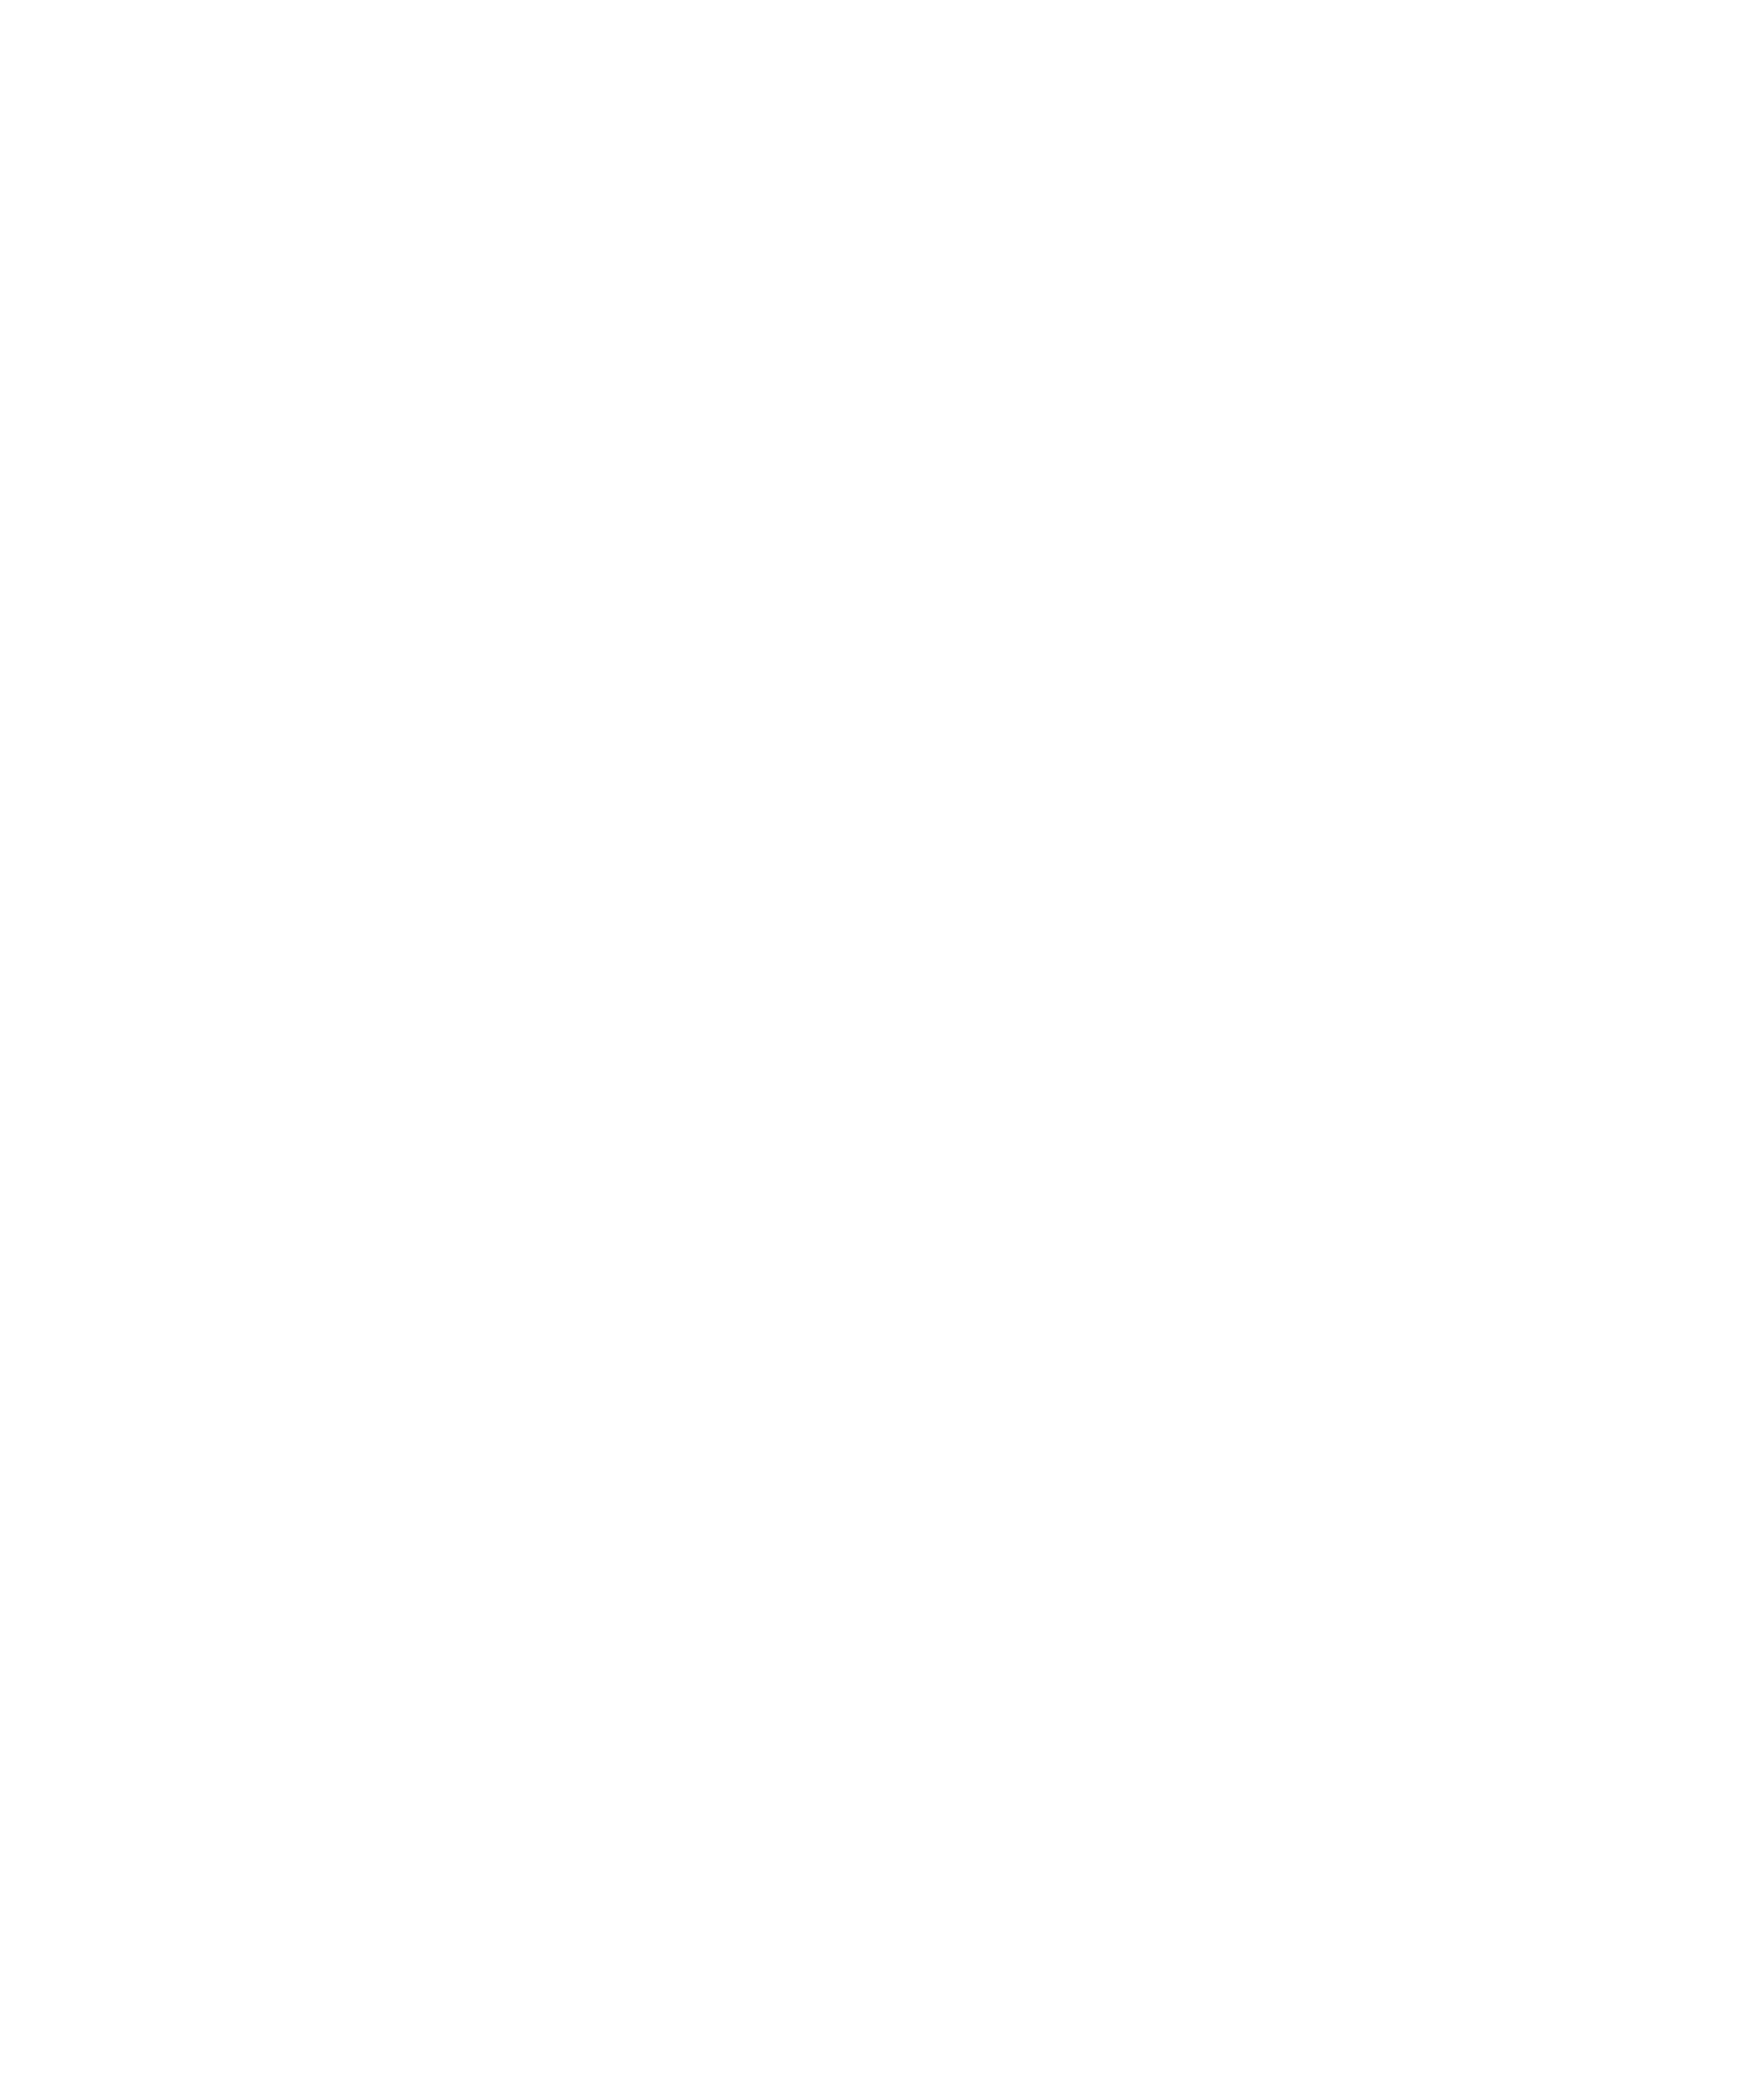 Revolution Logo with Text Inverted